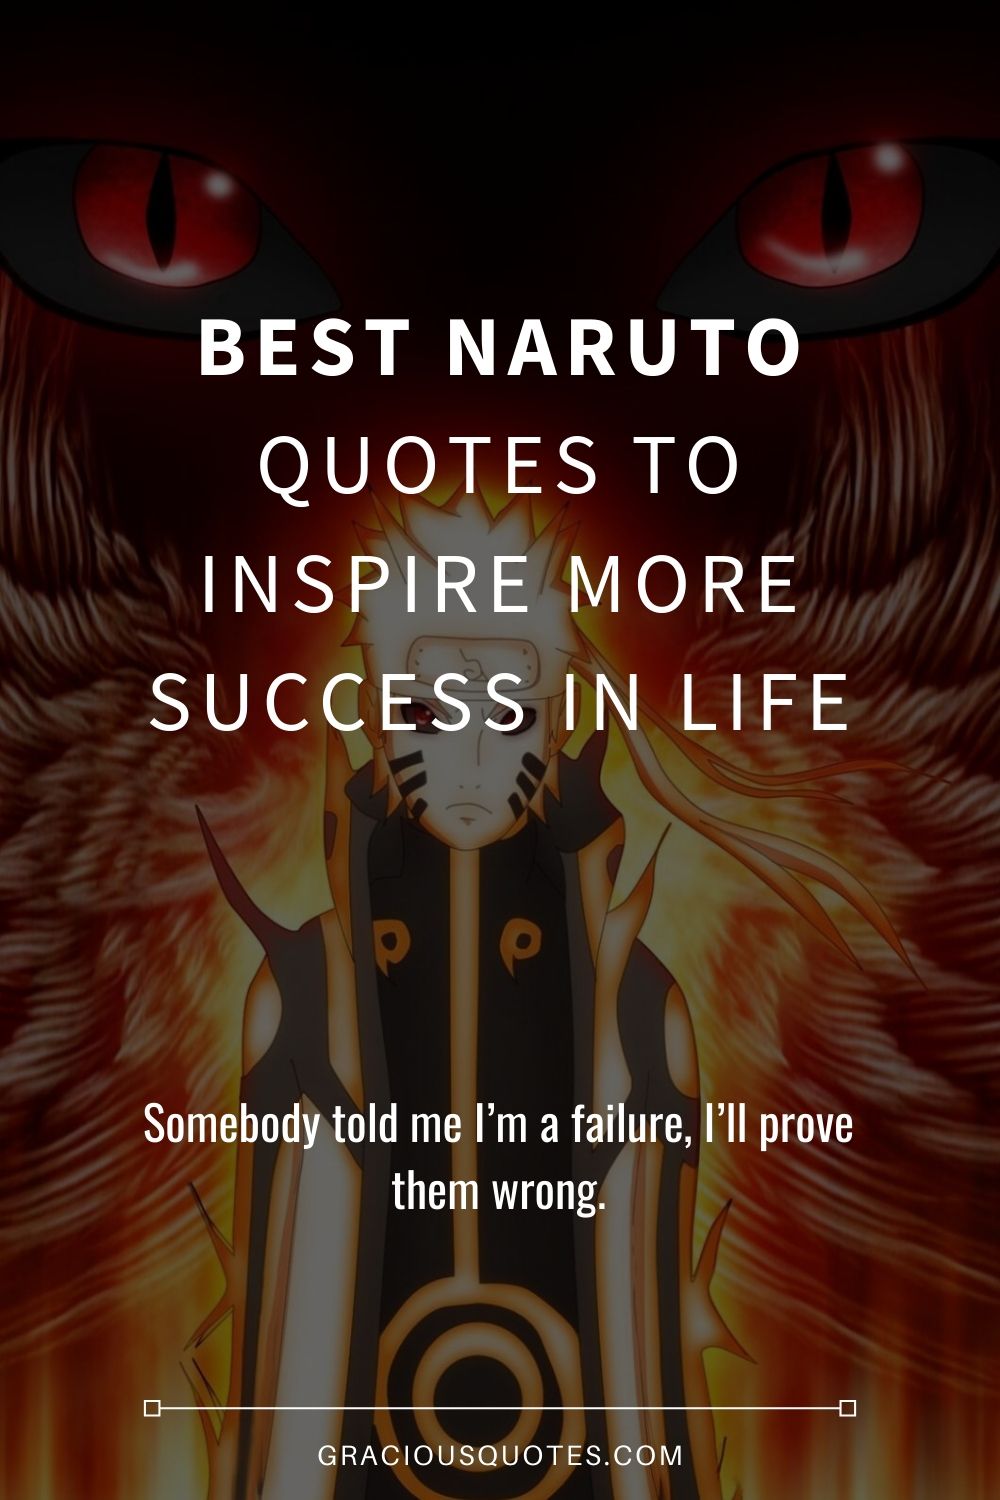 82 Best Naruto Quotes to Inspire You (TOUCHING)